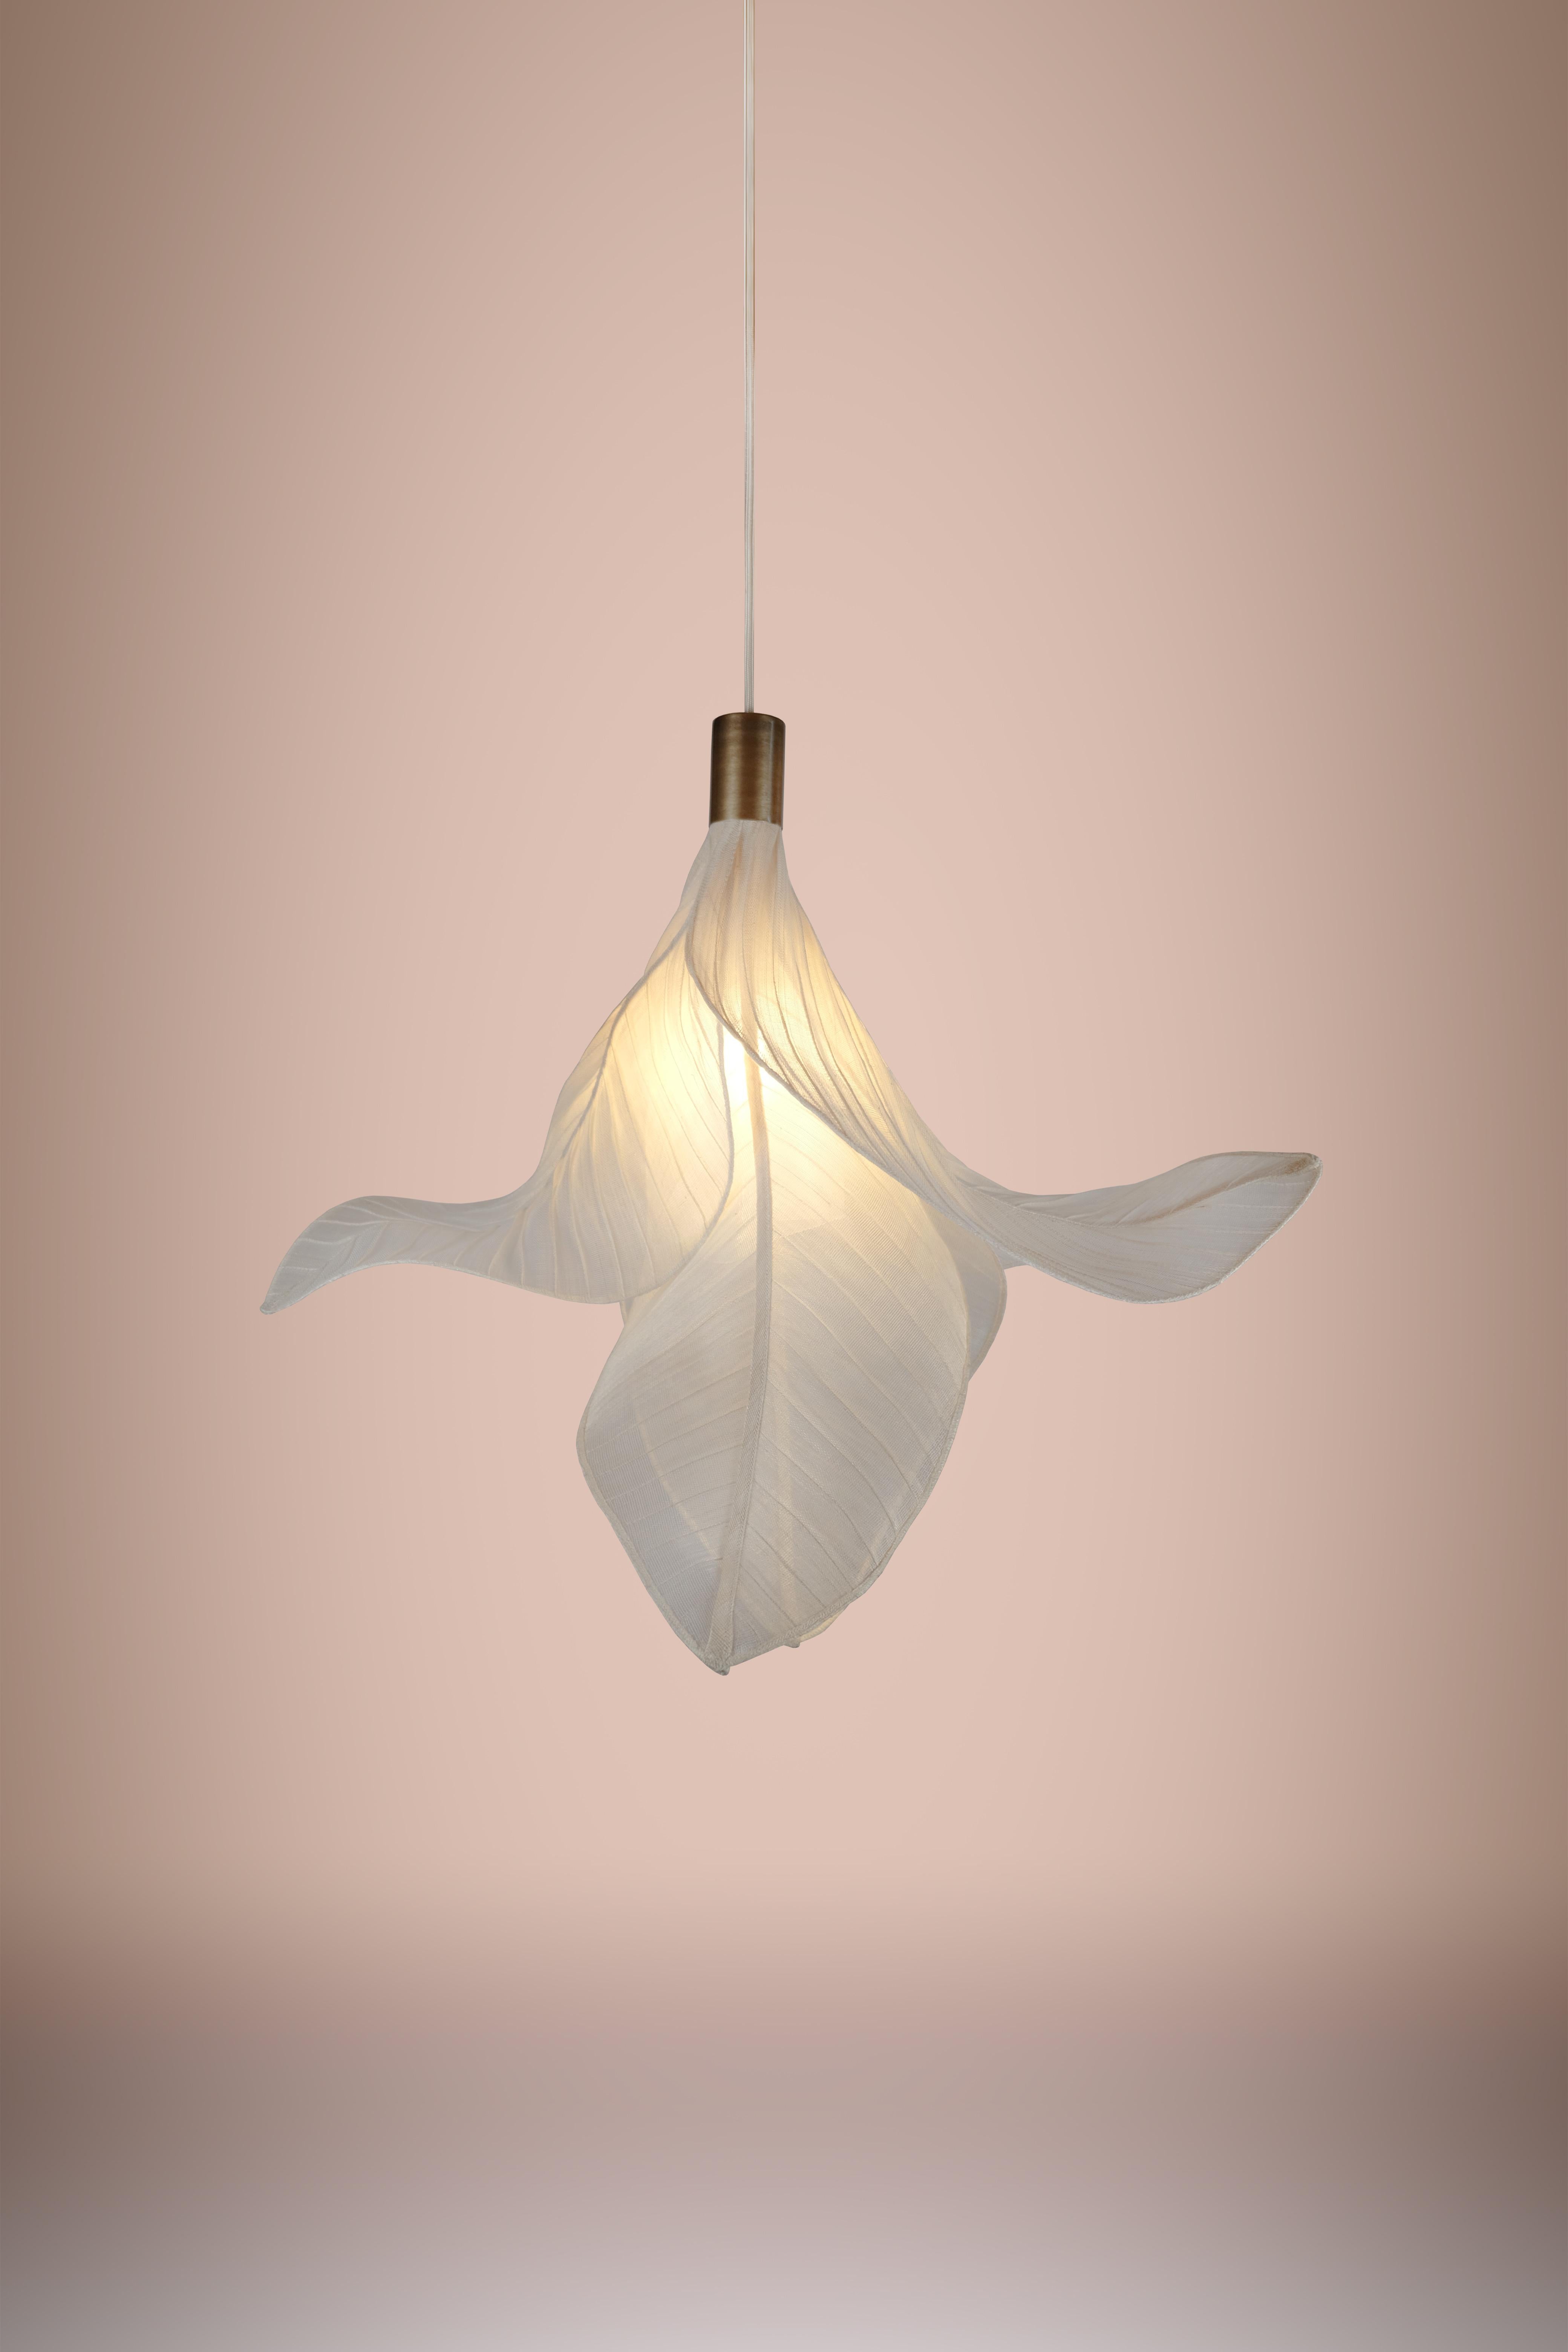 Hand-Crafted Modern Fabric Collectible Sculptural Pendant Light from Studio Mirei, Sirenetta For Sale